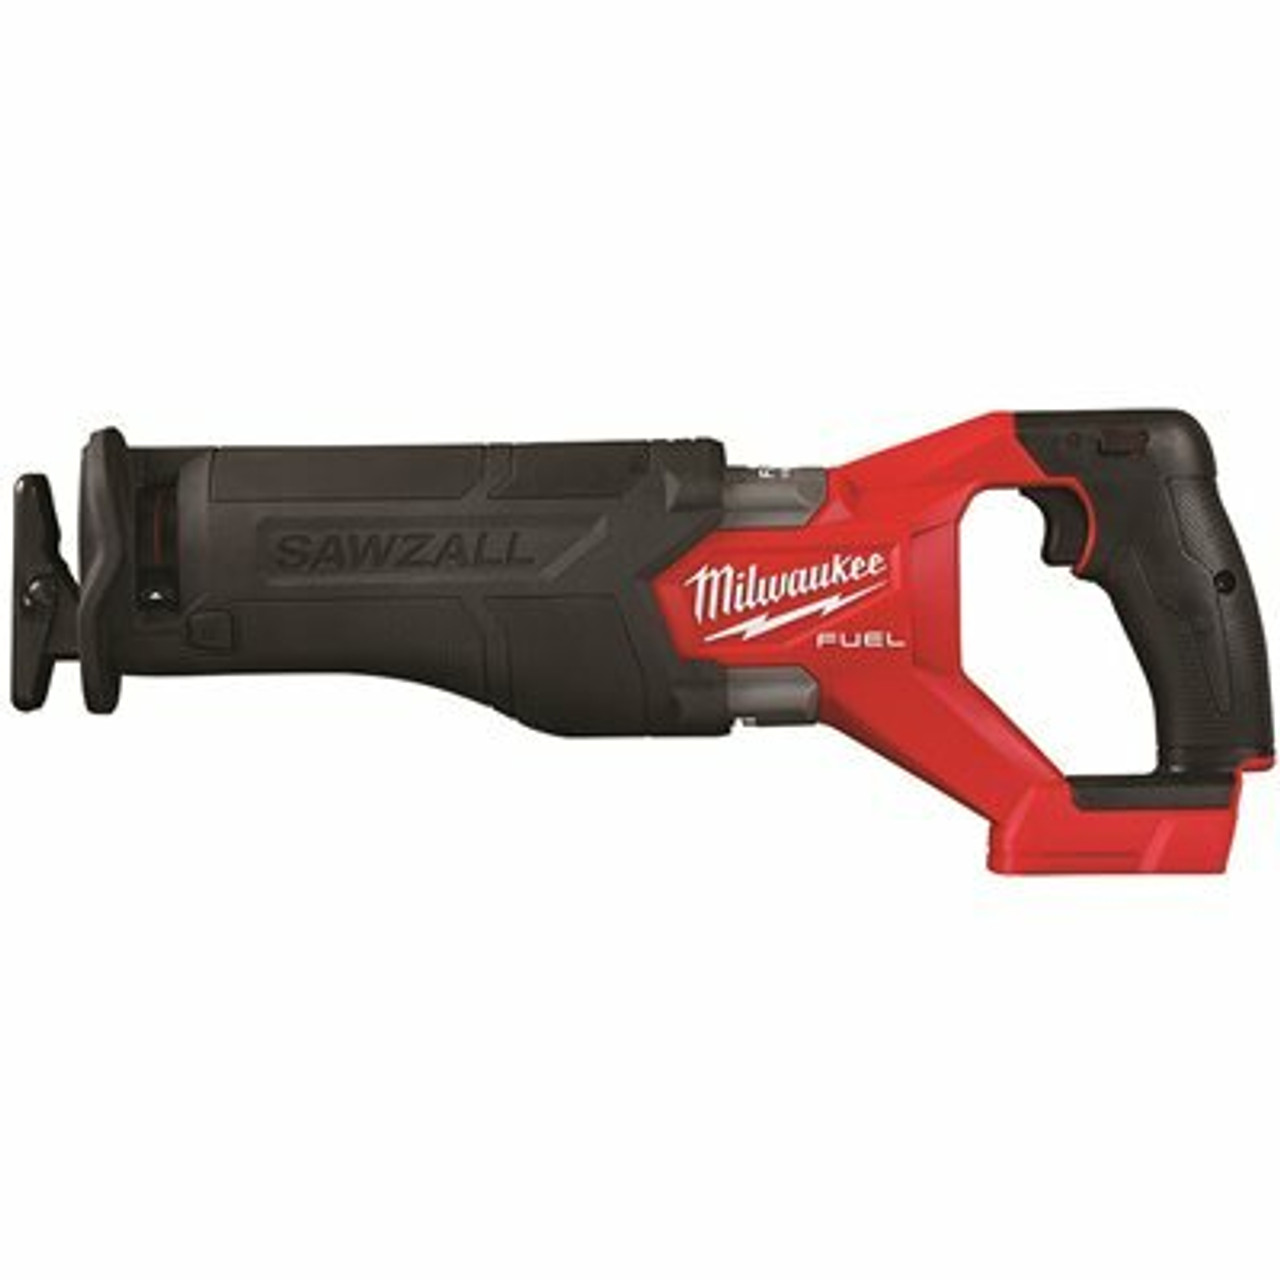 Milwaukee M18 Fuel Gen-2 18-Volt Lithium-Ion Brushless Cordless Sawzall Reciprocating Saw (Tool-Only)